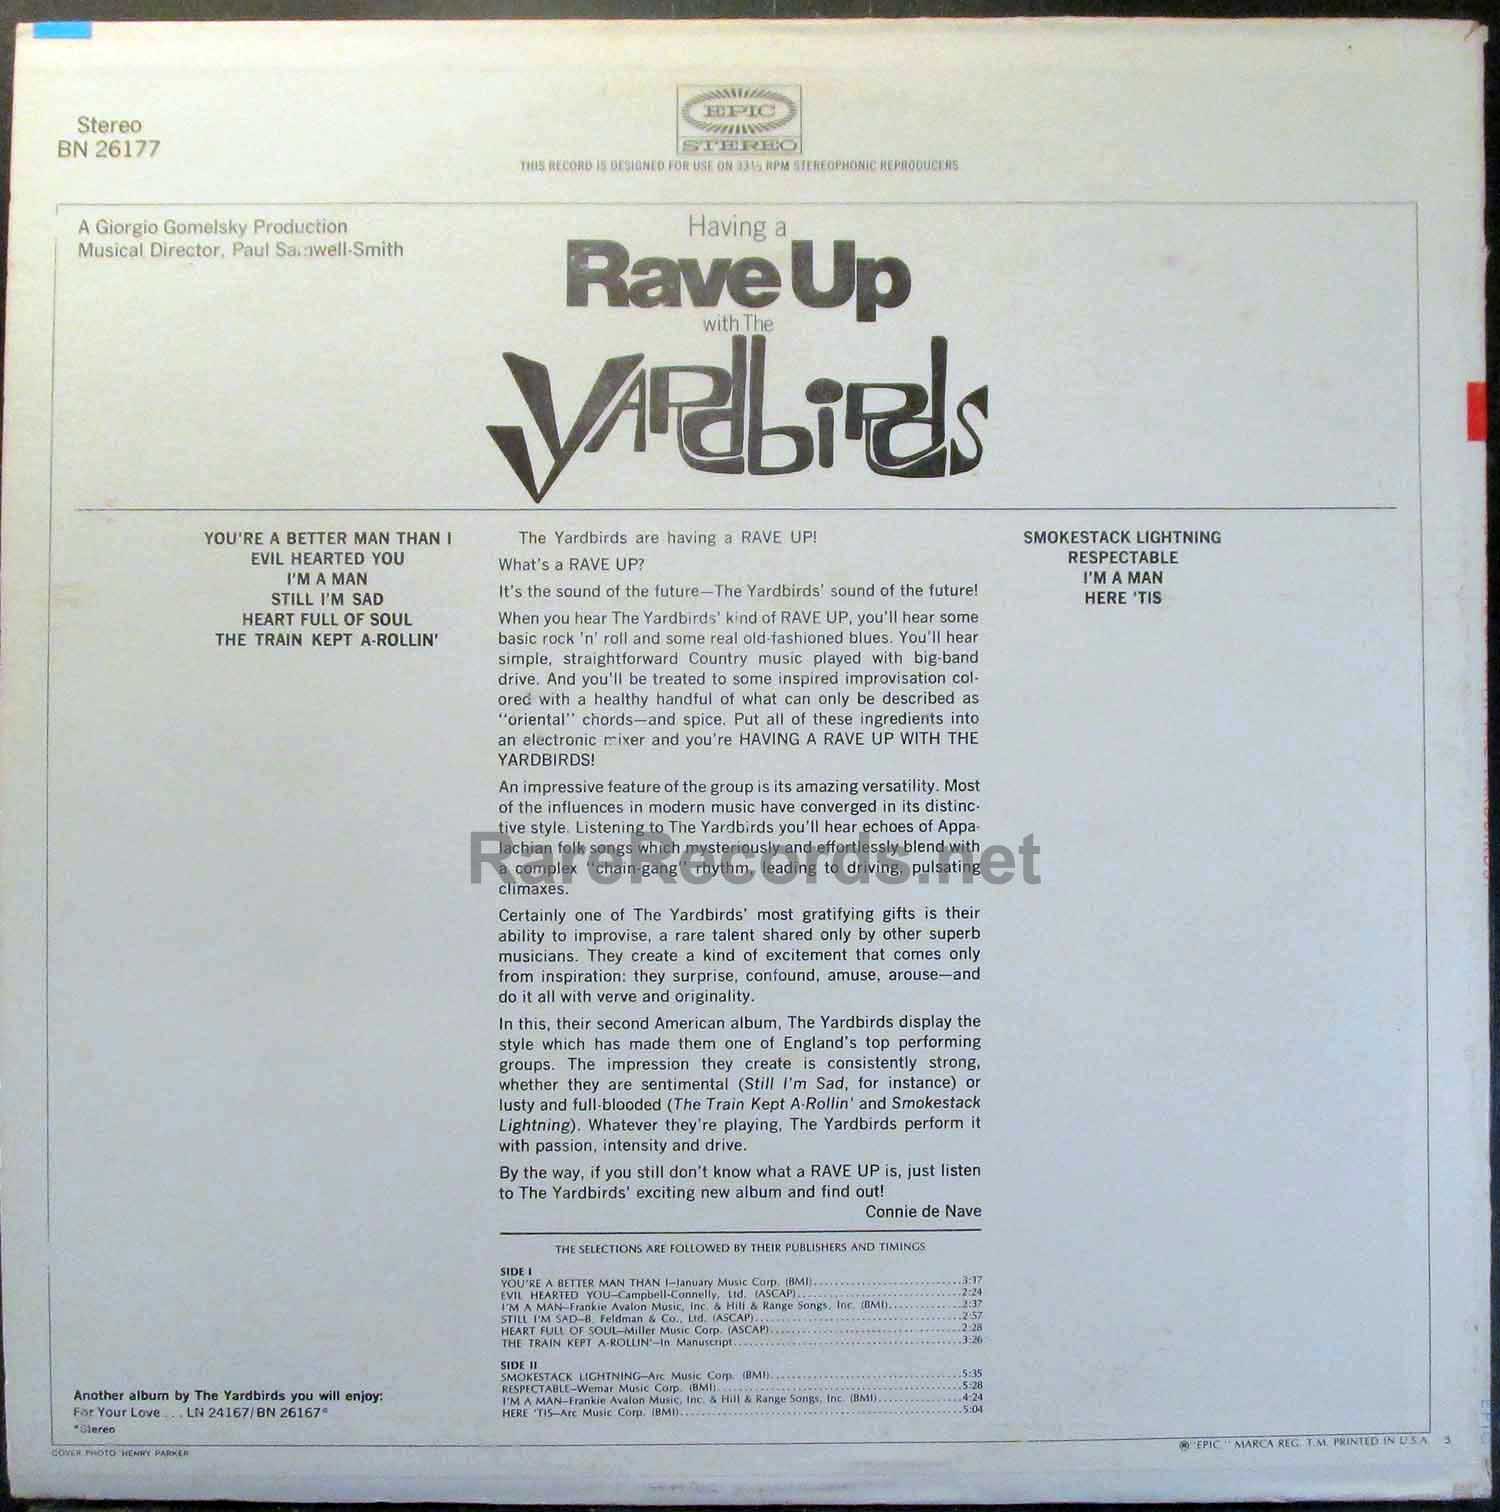 The Yardbirds - Having a Rave up with The Yardbirds LP Cover